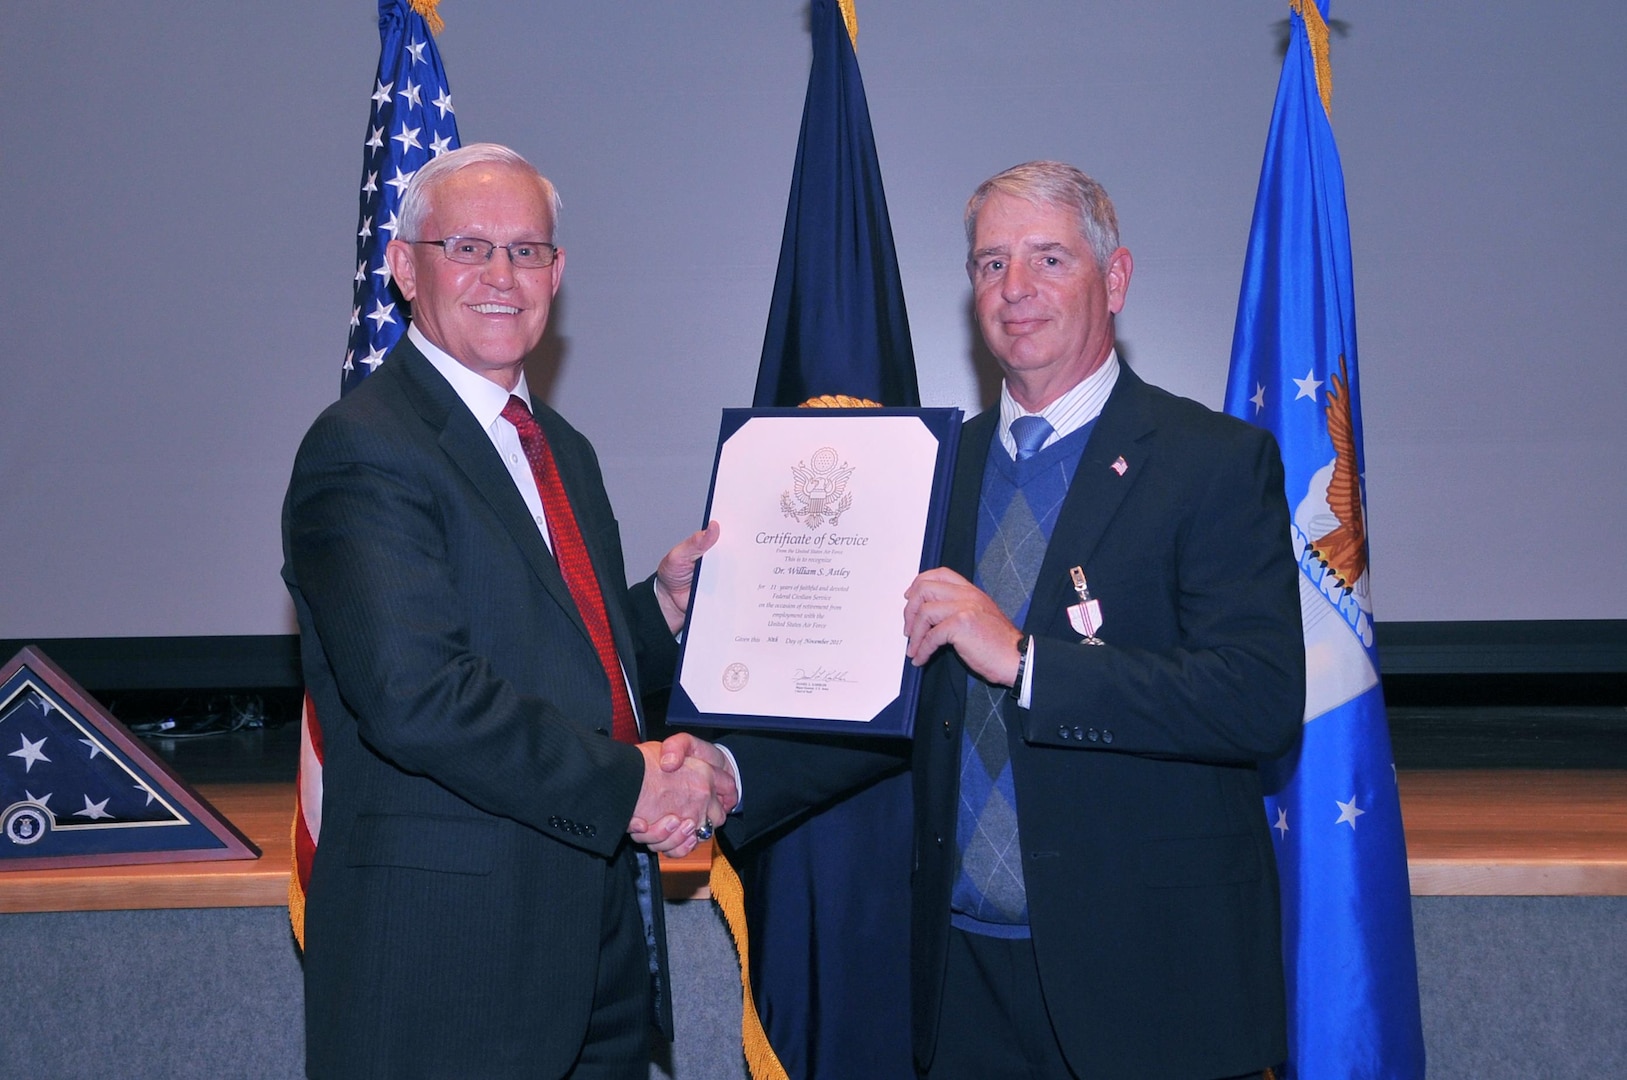 Patrick McVay (left), U.S. Strategic Command (USSTRATCOM) director of joint exercises, training and assessments, presents a certificate of service to Dr. William Astley, USSTRATCOM resiliency coordinator, during Astley’s retirement ceremony at Offutt Air Force Base, Neb., Nov. 30, 2017. Astley retired after 36-plus years of service as an Air Force officer and government civilian. Throughout his 11 years with USSTRATCOM, Astley led a team that developed several programs and activities to ensure members of the command remain sharp, fresh and productive. One of nine Department of Defense unified combatant commands, USSTRATCOM has global responsibilities assigned through the Unified Command Plan that include strategic deterrence, nuclear operations, space operations, joint electromagnetic spectrum operations, global strike, missile defense, and analysis and targeting.